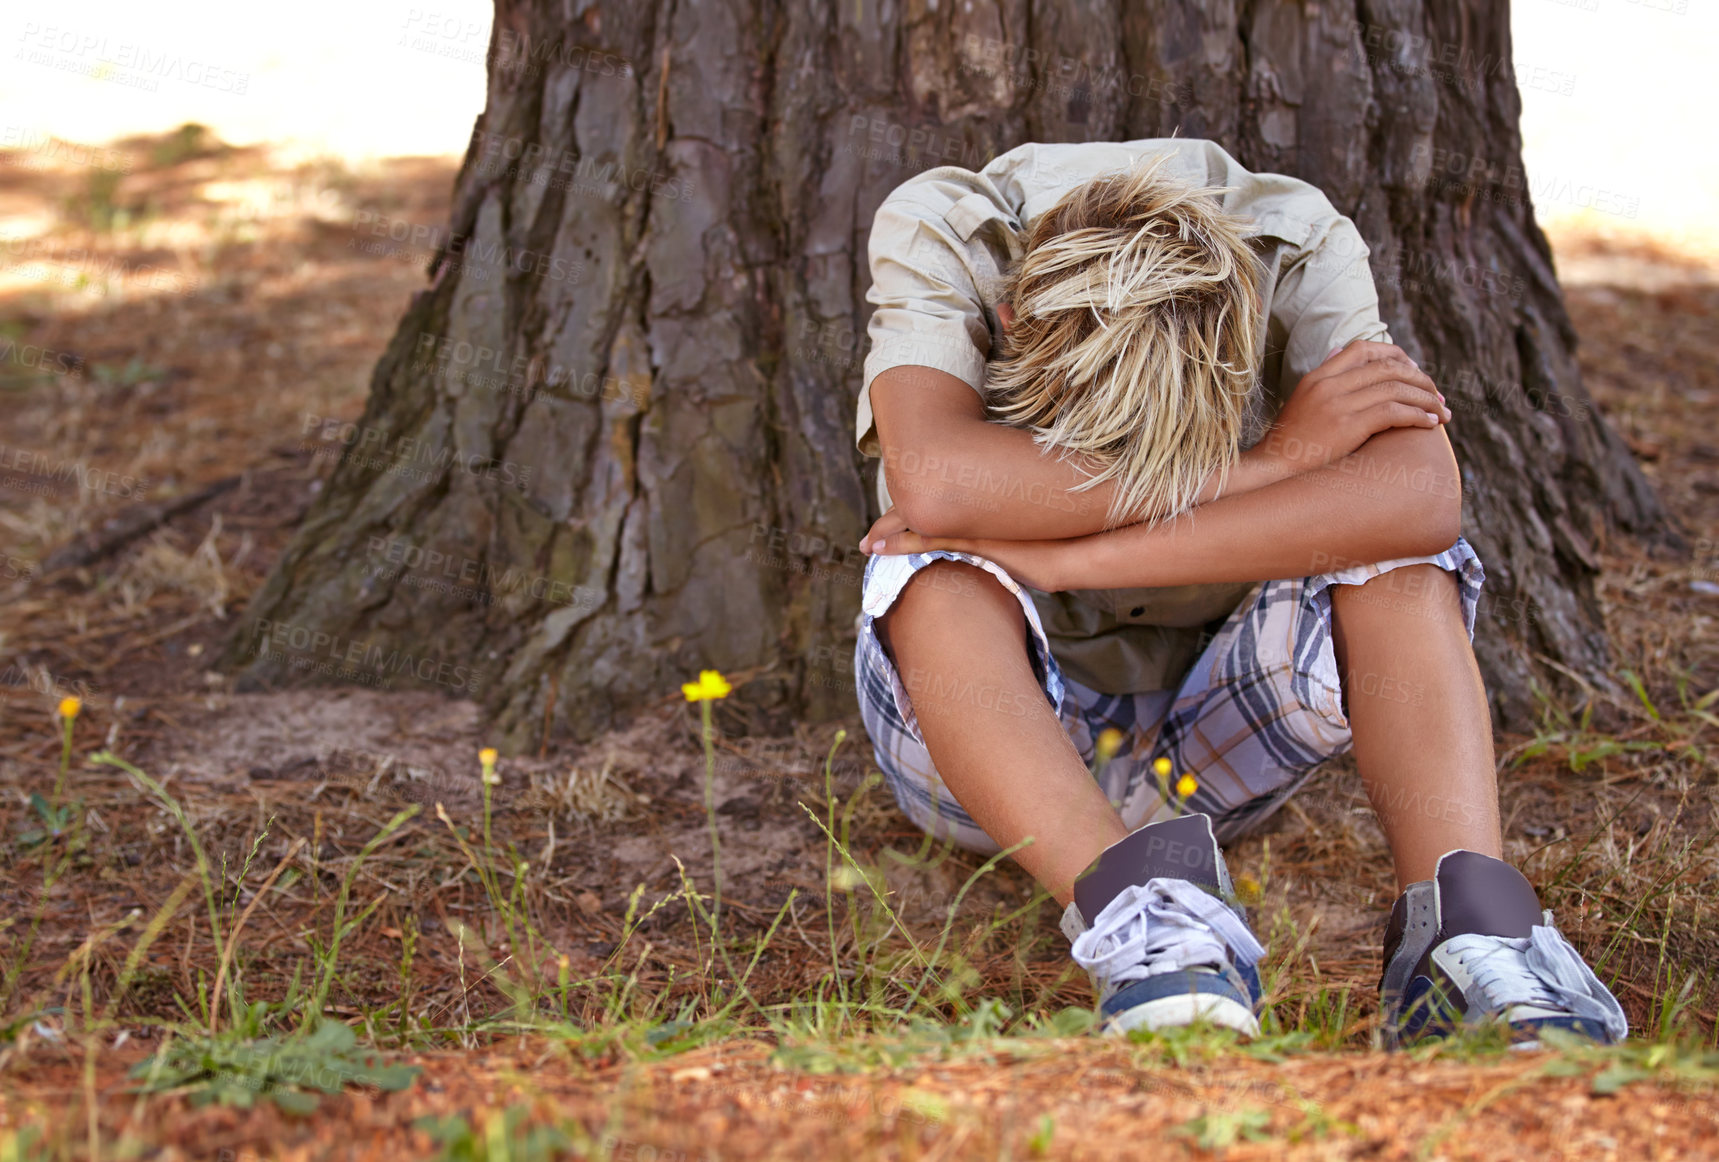 Buy stock photo Sad boy, stress and depression by tree with anxiety, mental health or bored on grass in nature. Male person, child or teenager resting head on arms by stump in loneliness, childhood or left out